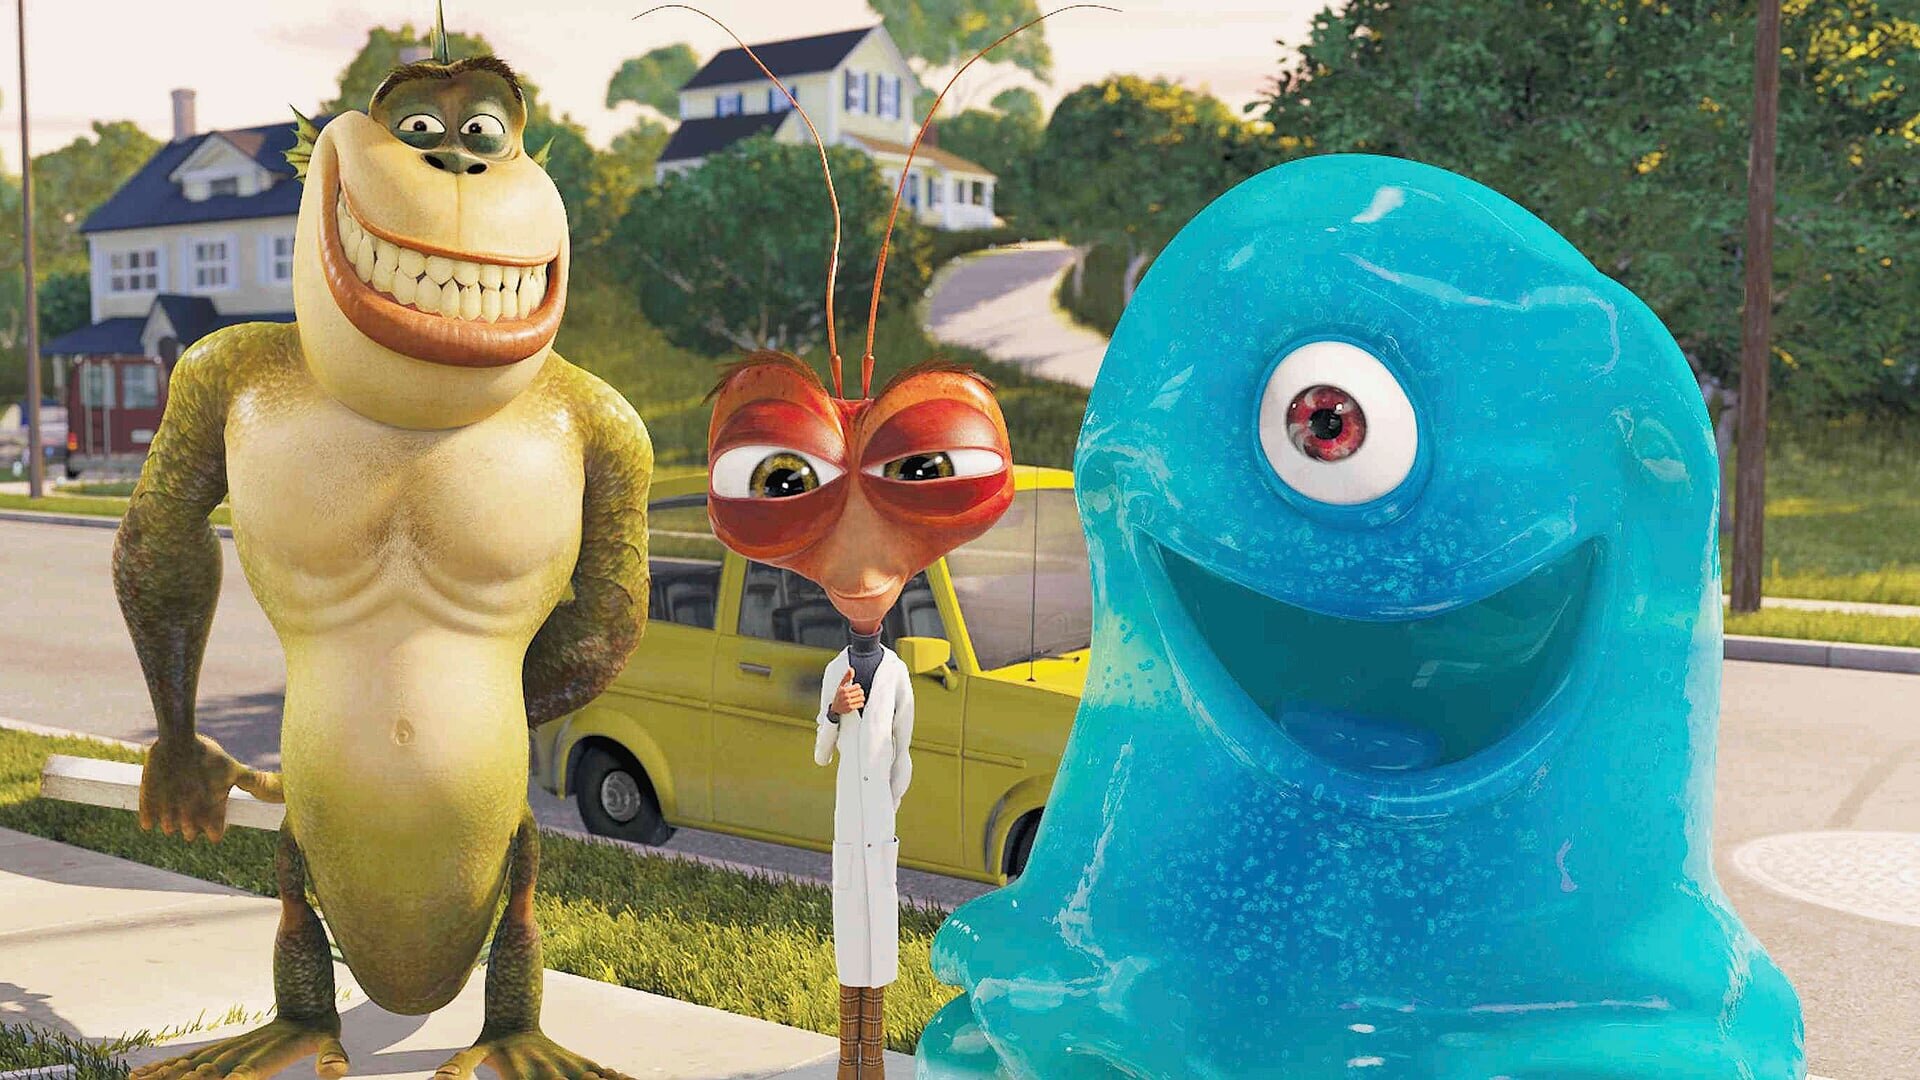 Reese Witherspoon is committed to Earth in the animated film Monsters vs. Aliens.